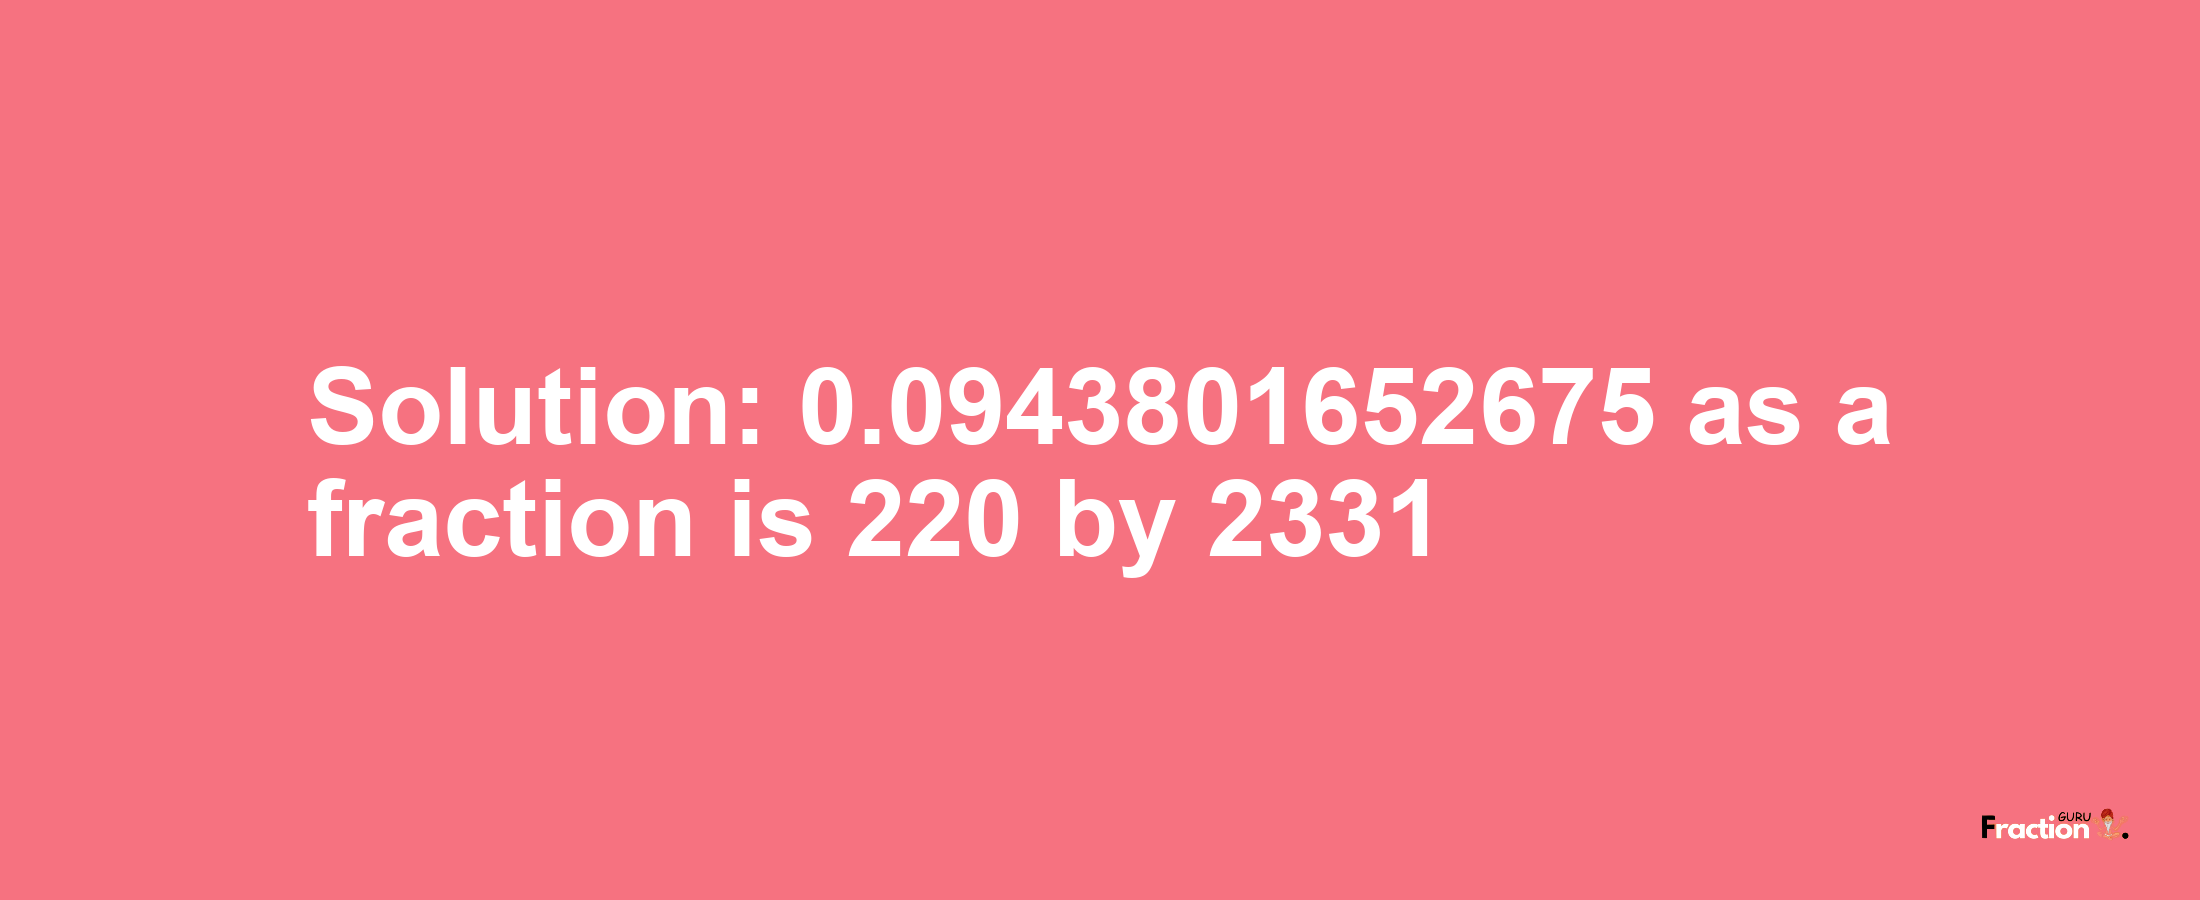 Solution:0.0943801652675 as a fraction is 220/2331